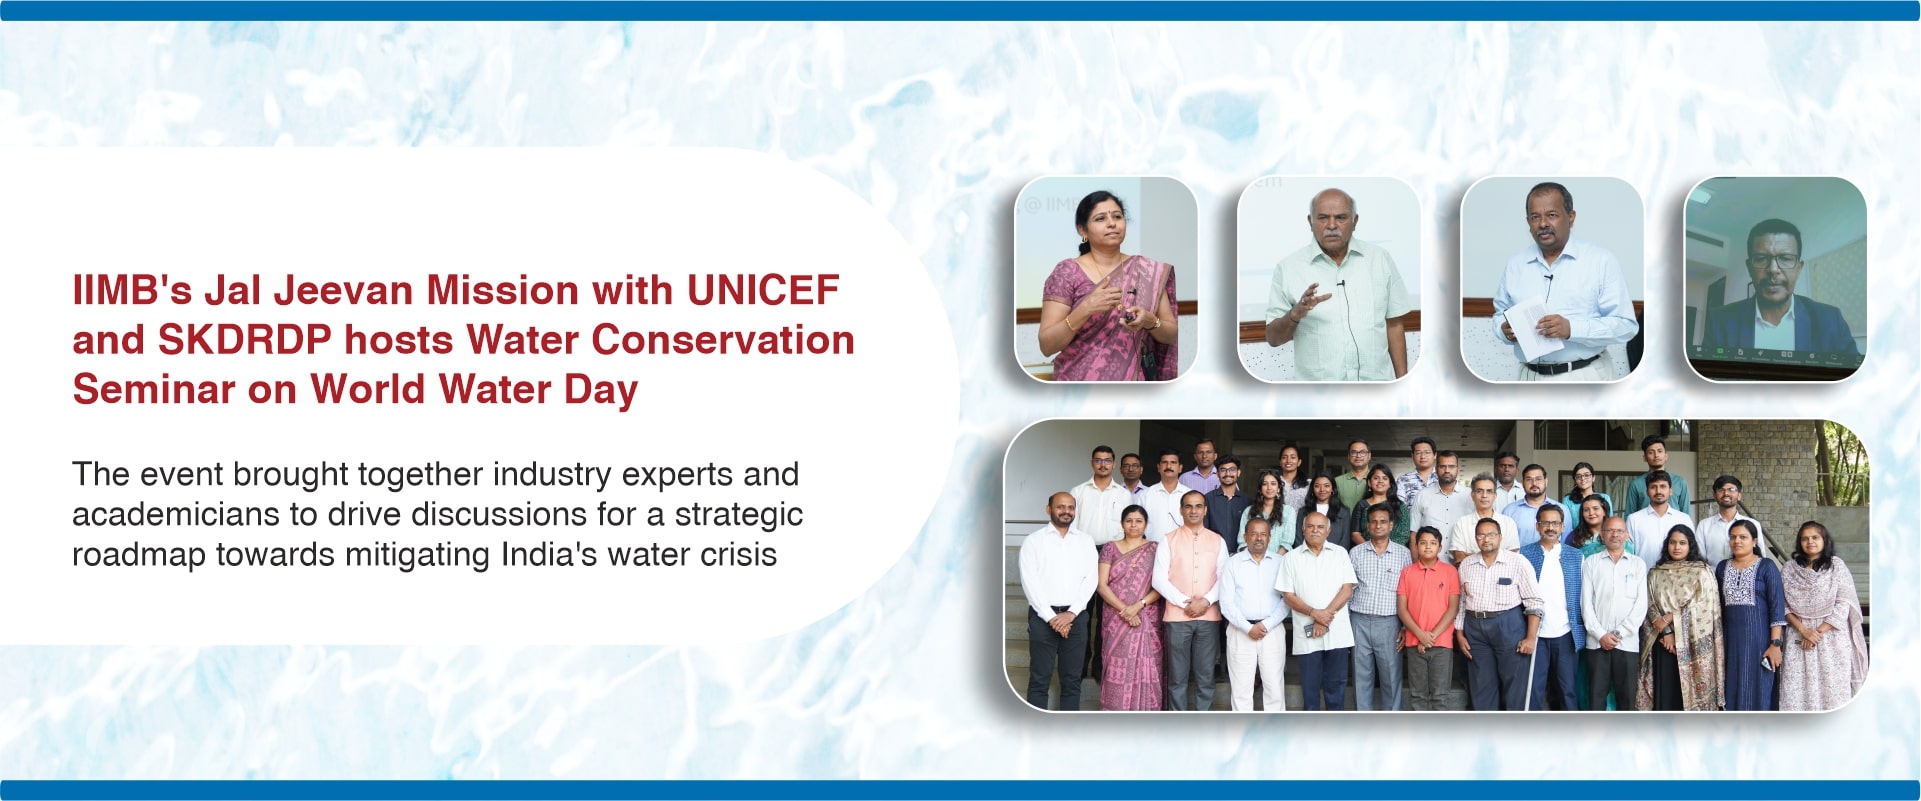 IIMB’s Jal Jeevan Mission with UNICEF and SKDRDP hosts Water Conservation Seminar on World Water Day